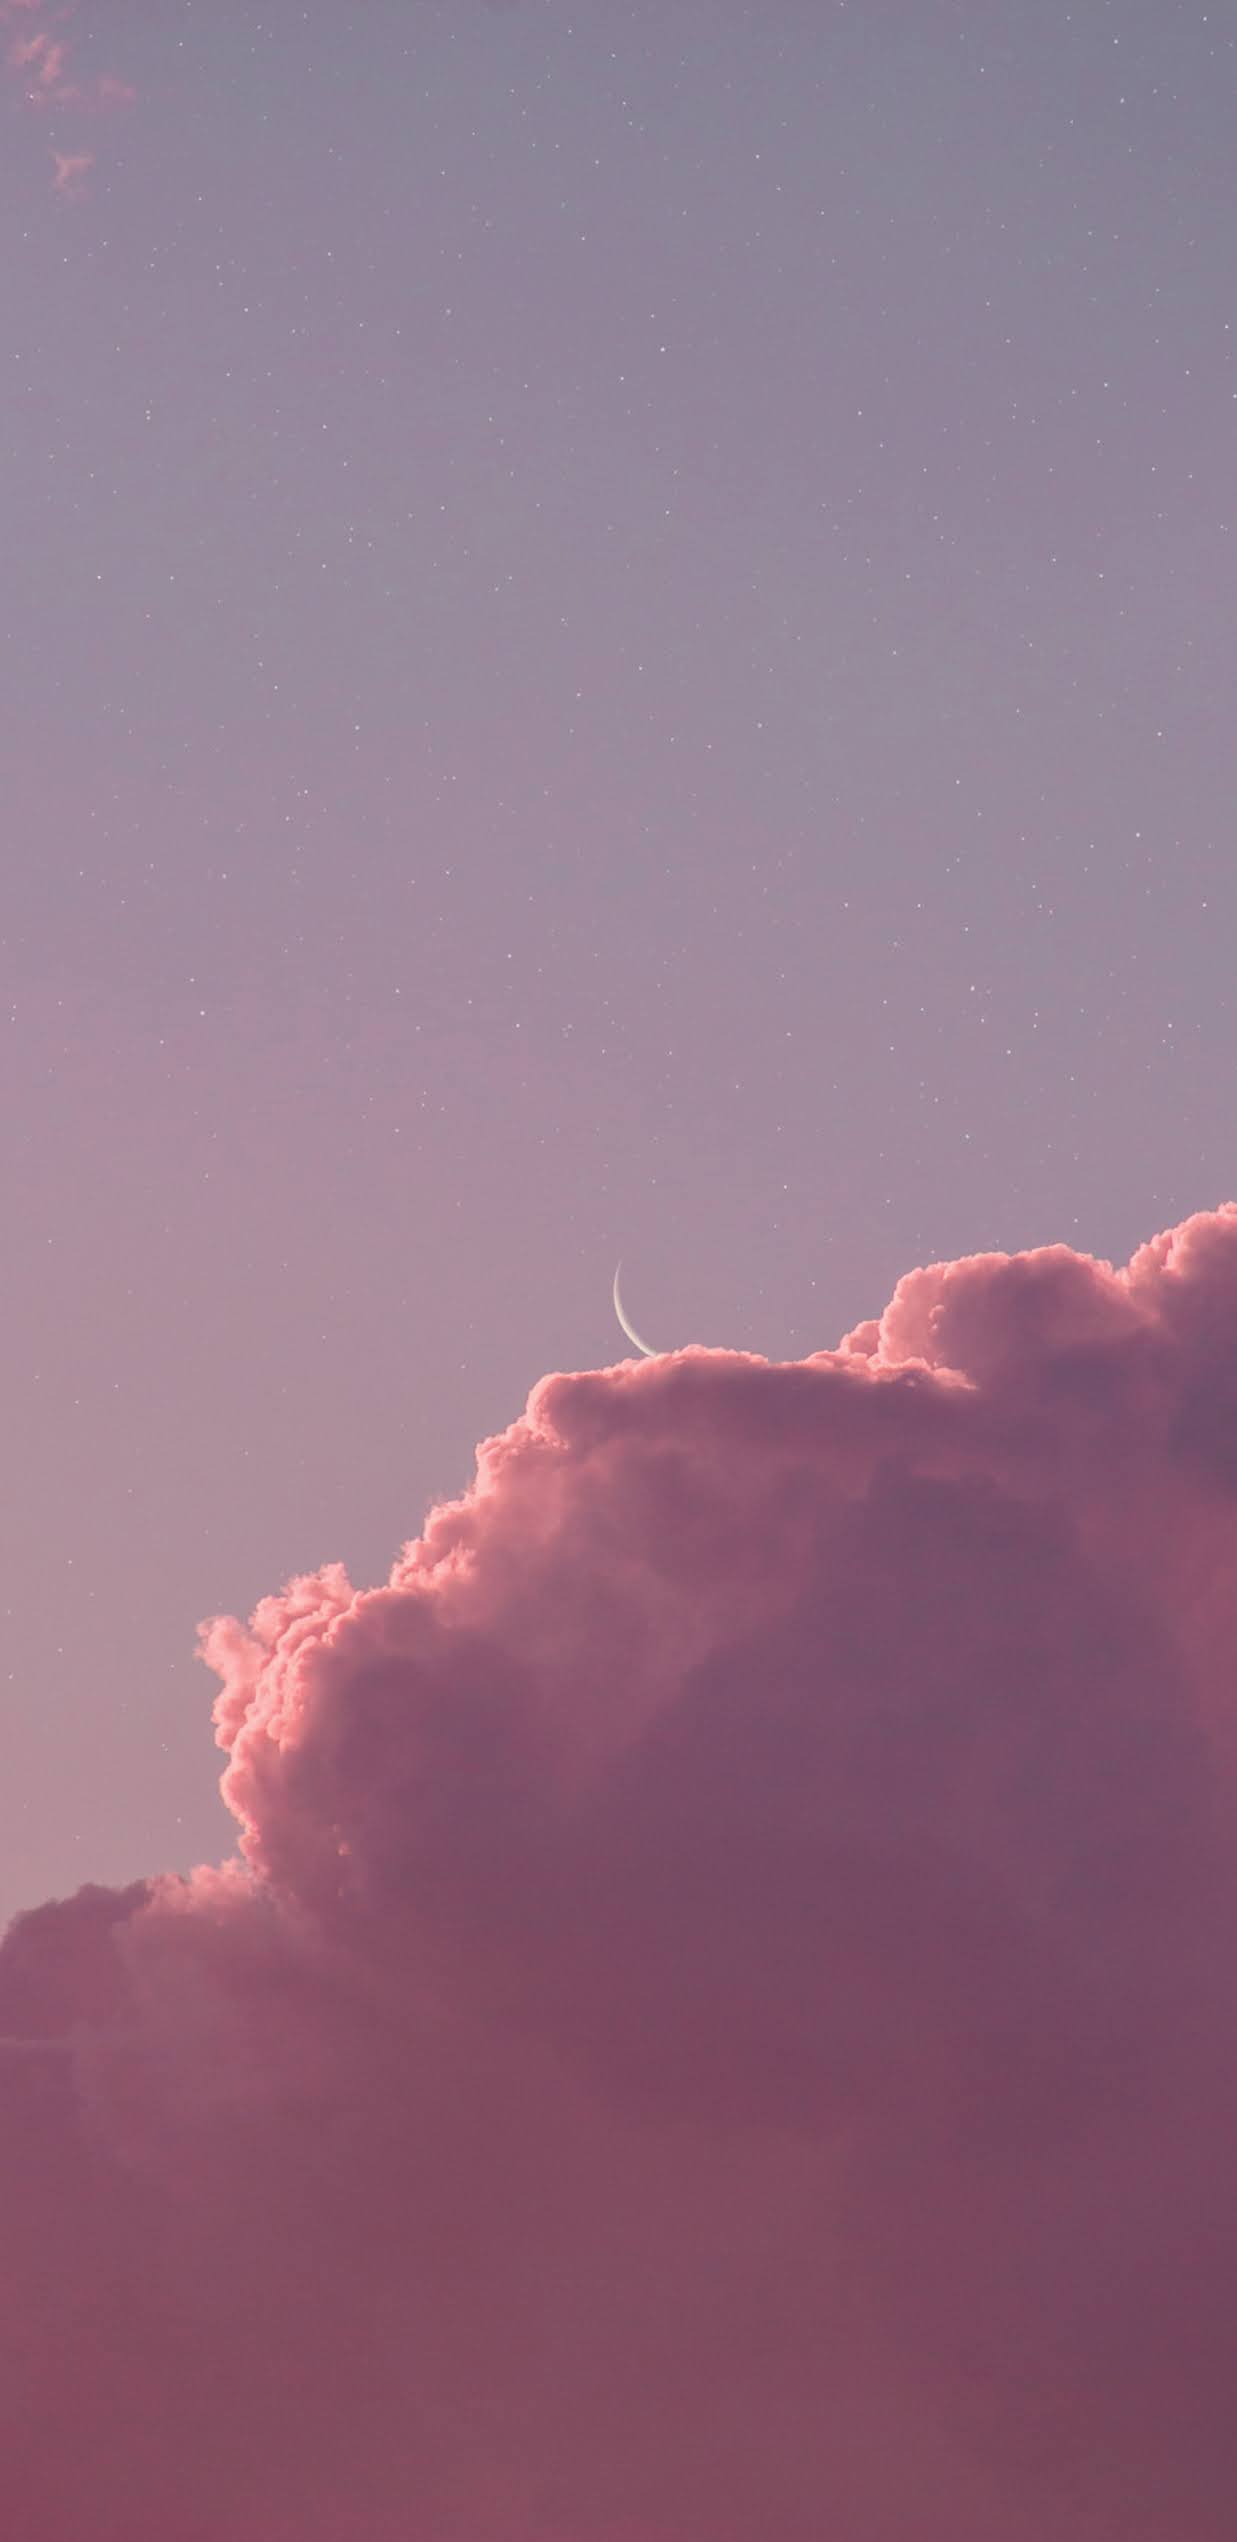 Crescent moon in the pink starry sky